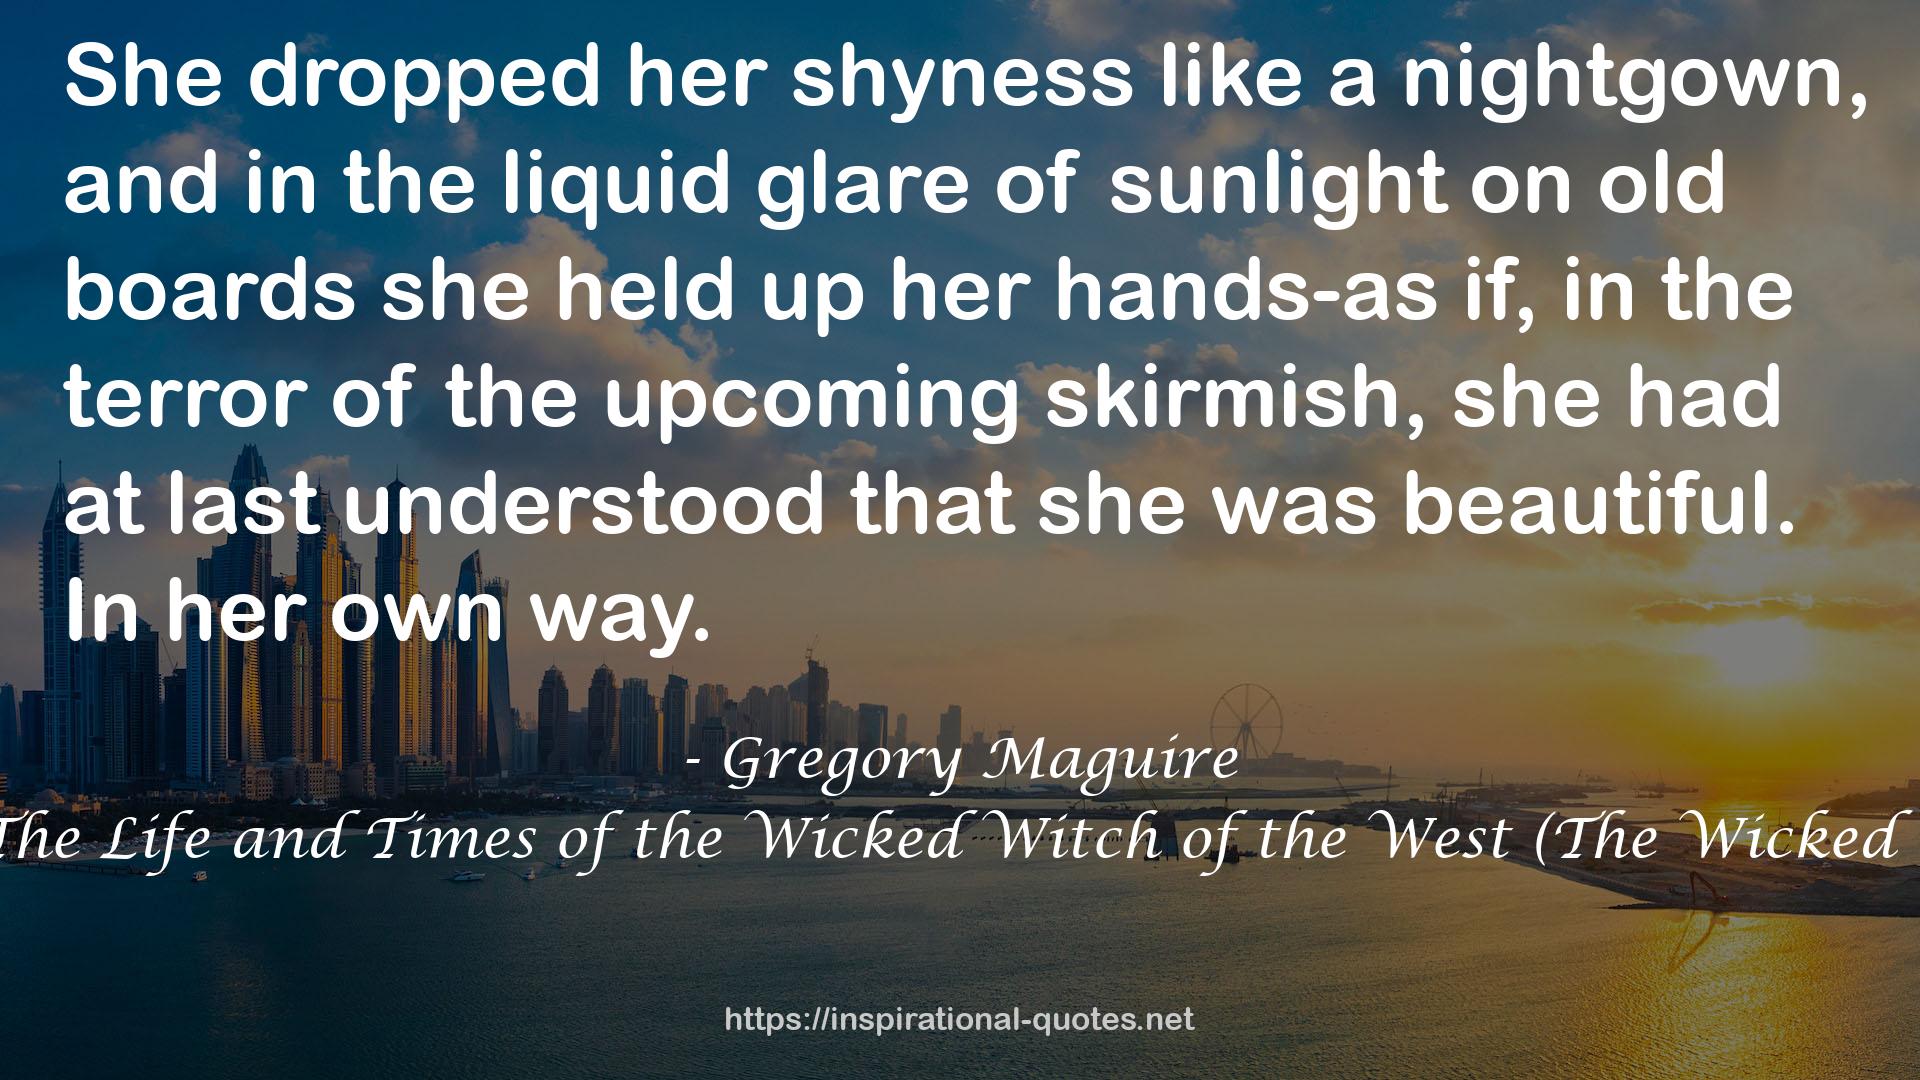 Wicked: The Life and Times of the Wicked Witch of the West (The Wicked Years, #1) QUOTES